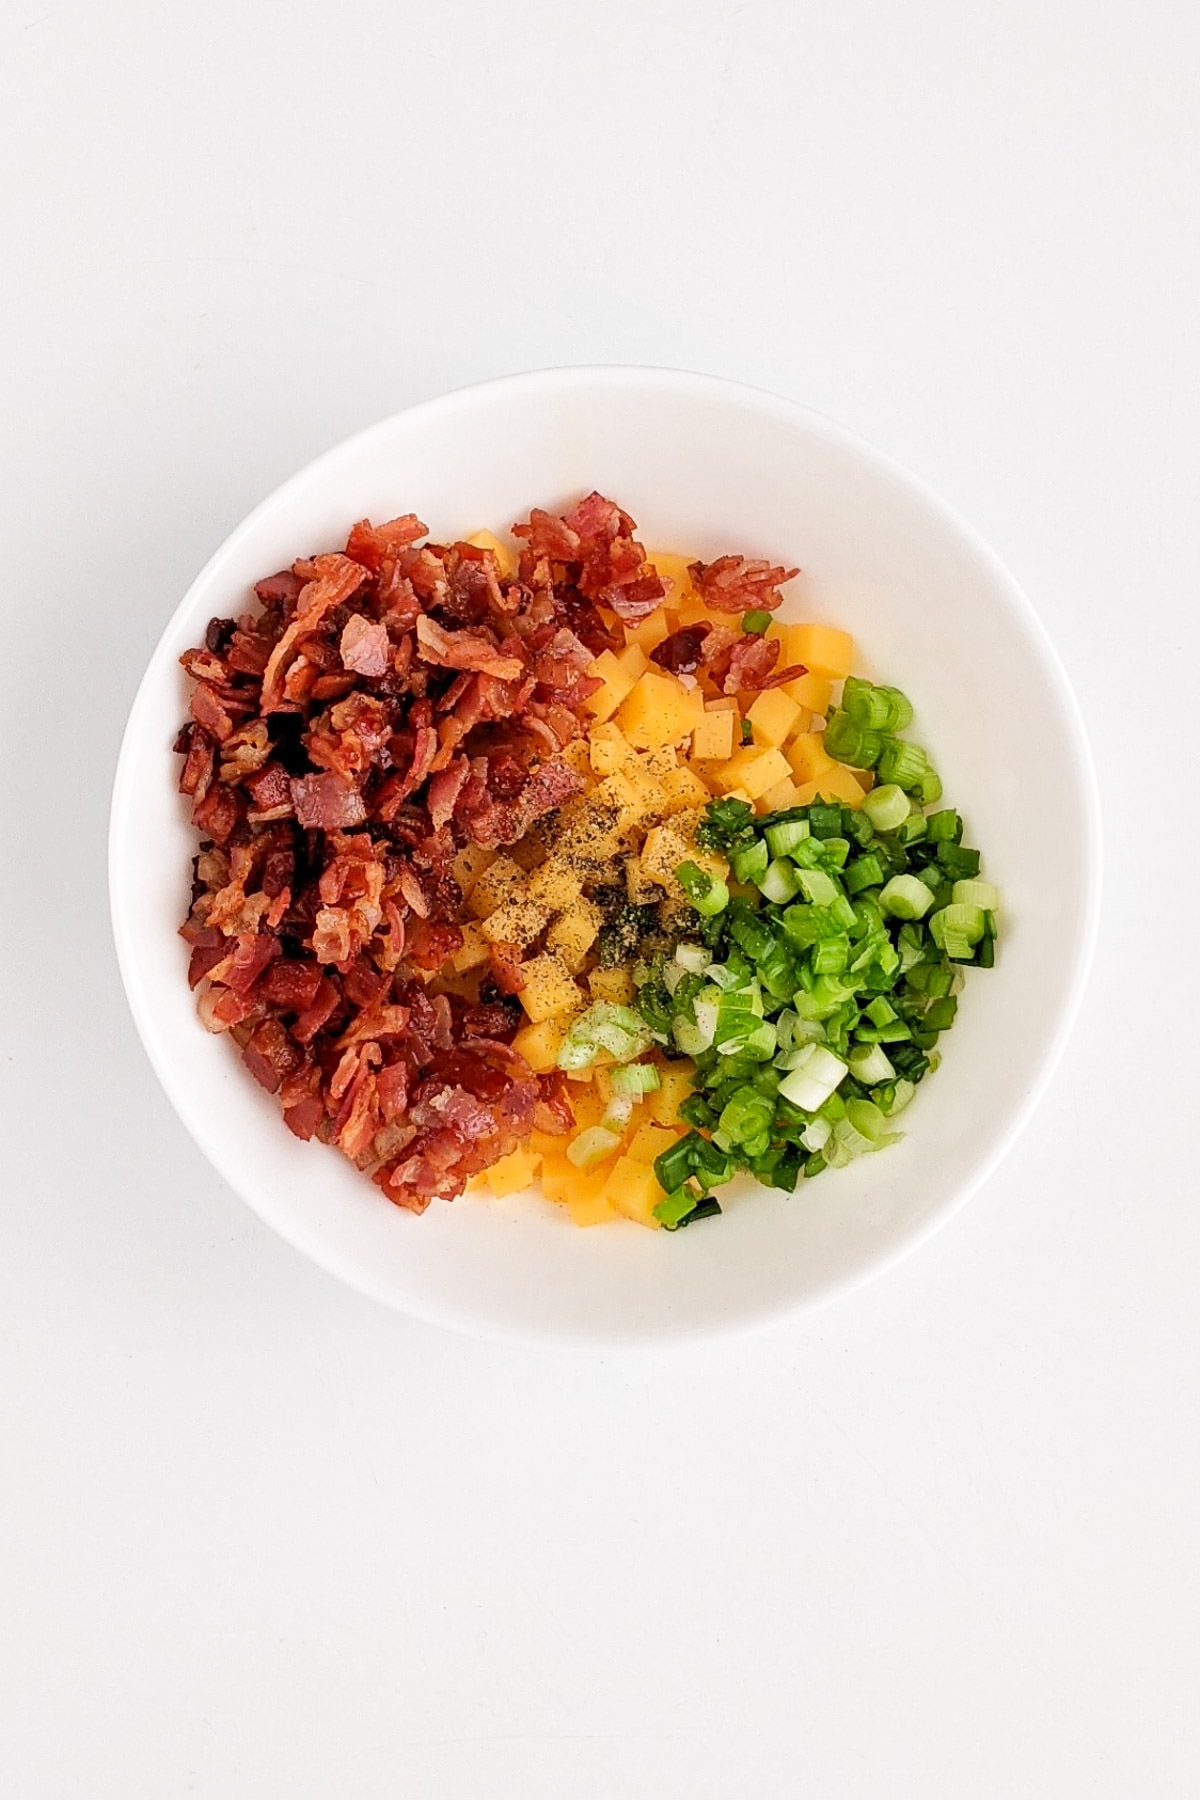 Cheddar cheese with bacon, green onions in a white plate.